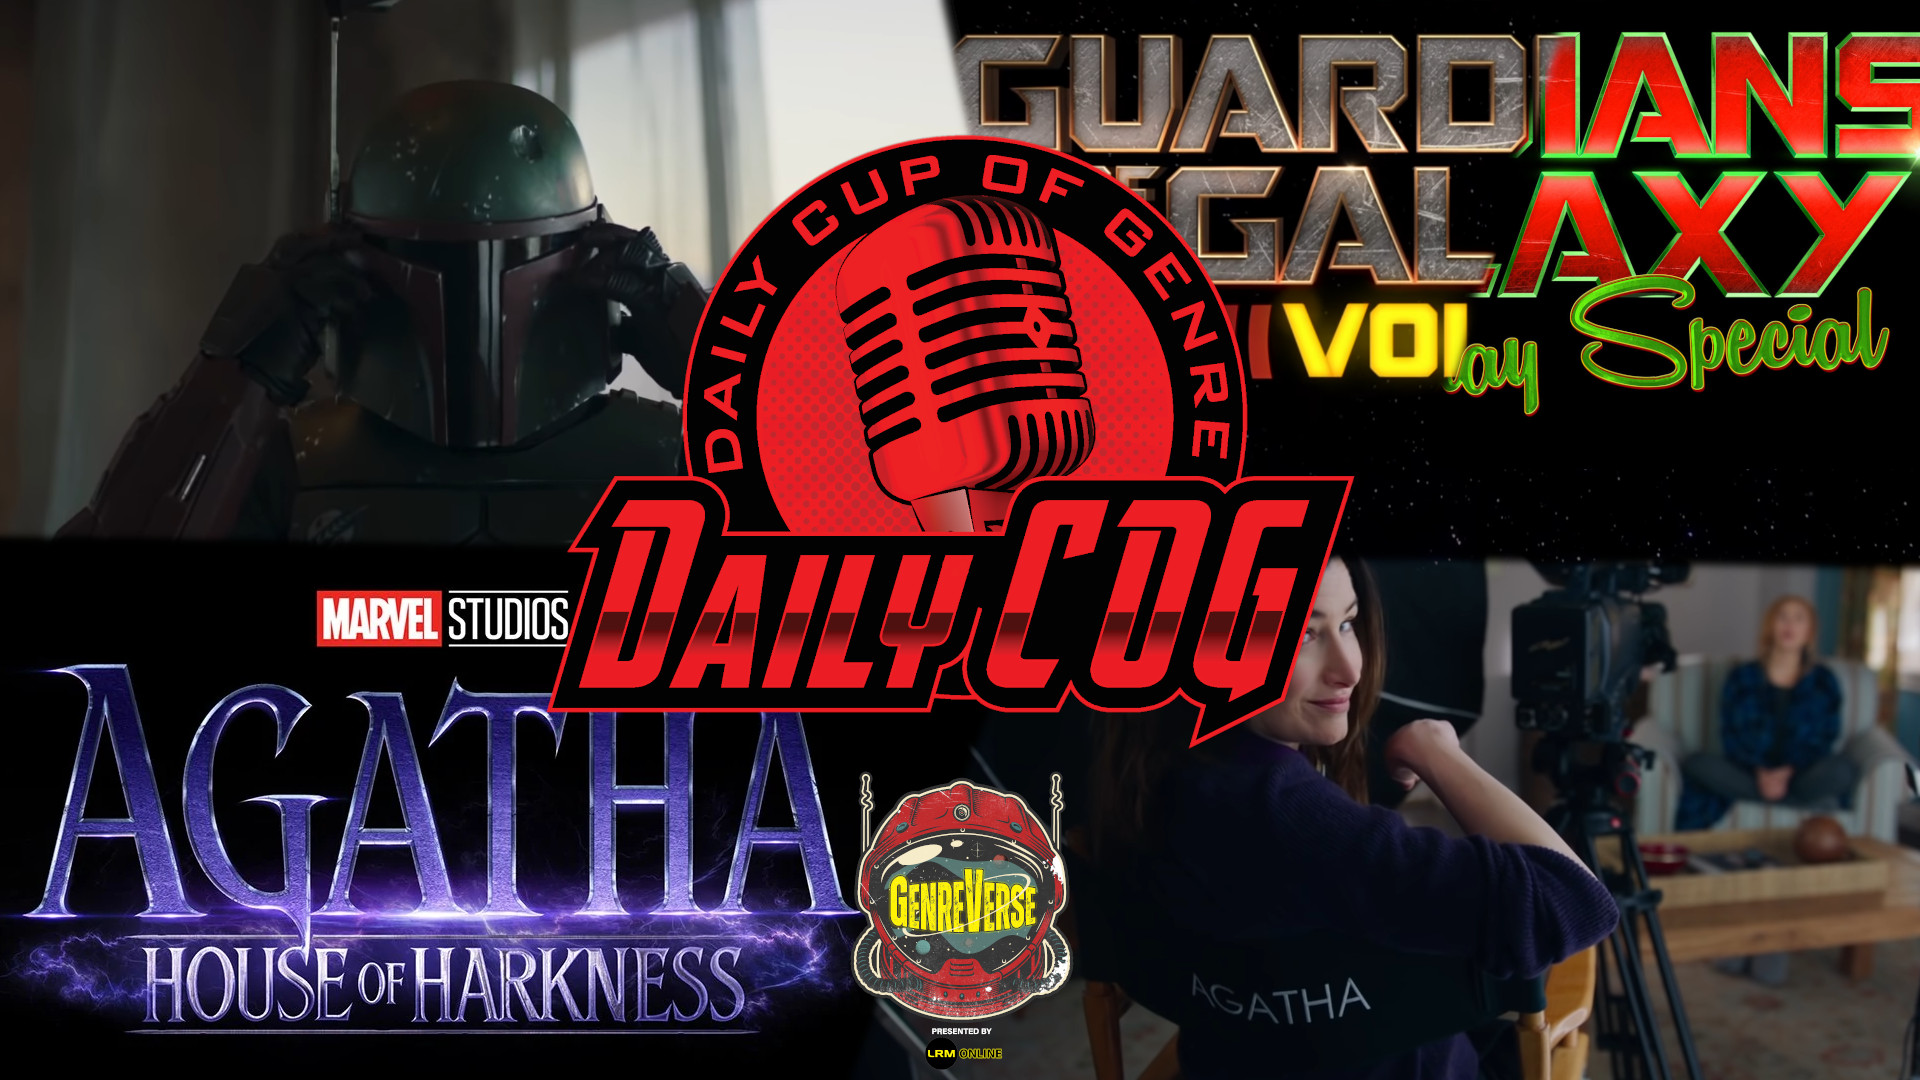 Book Of Boba Fett Chapter 3 Reactions, Guardians Of The Galaxy Vol. 3 & Holiday Special Thoughts, & House Of Harkness Details | Daily COG